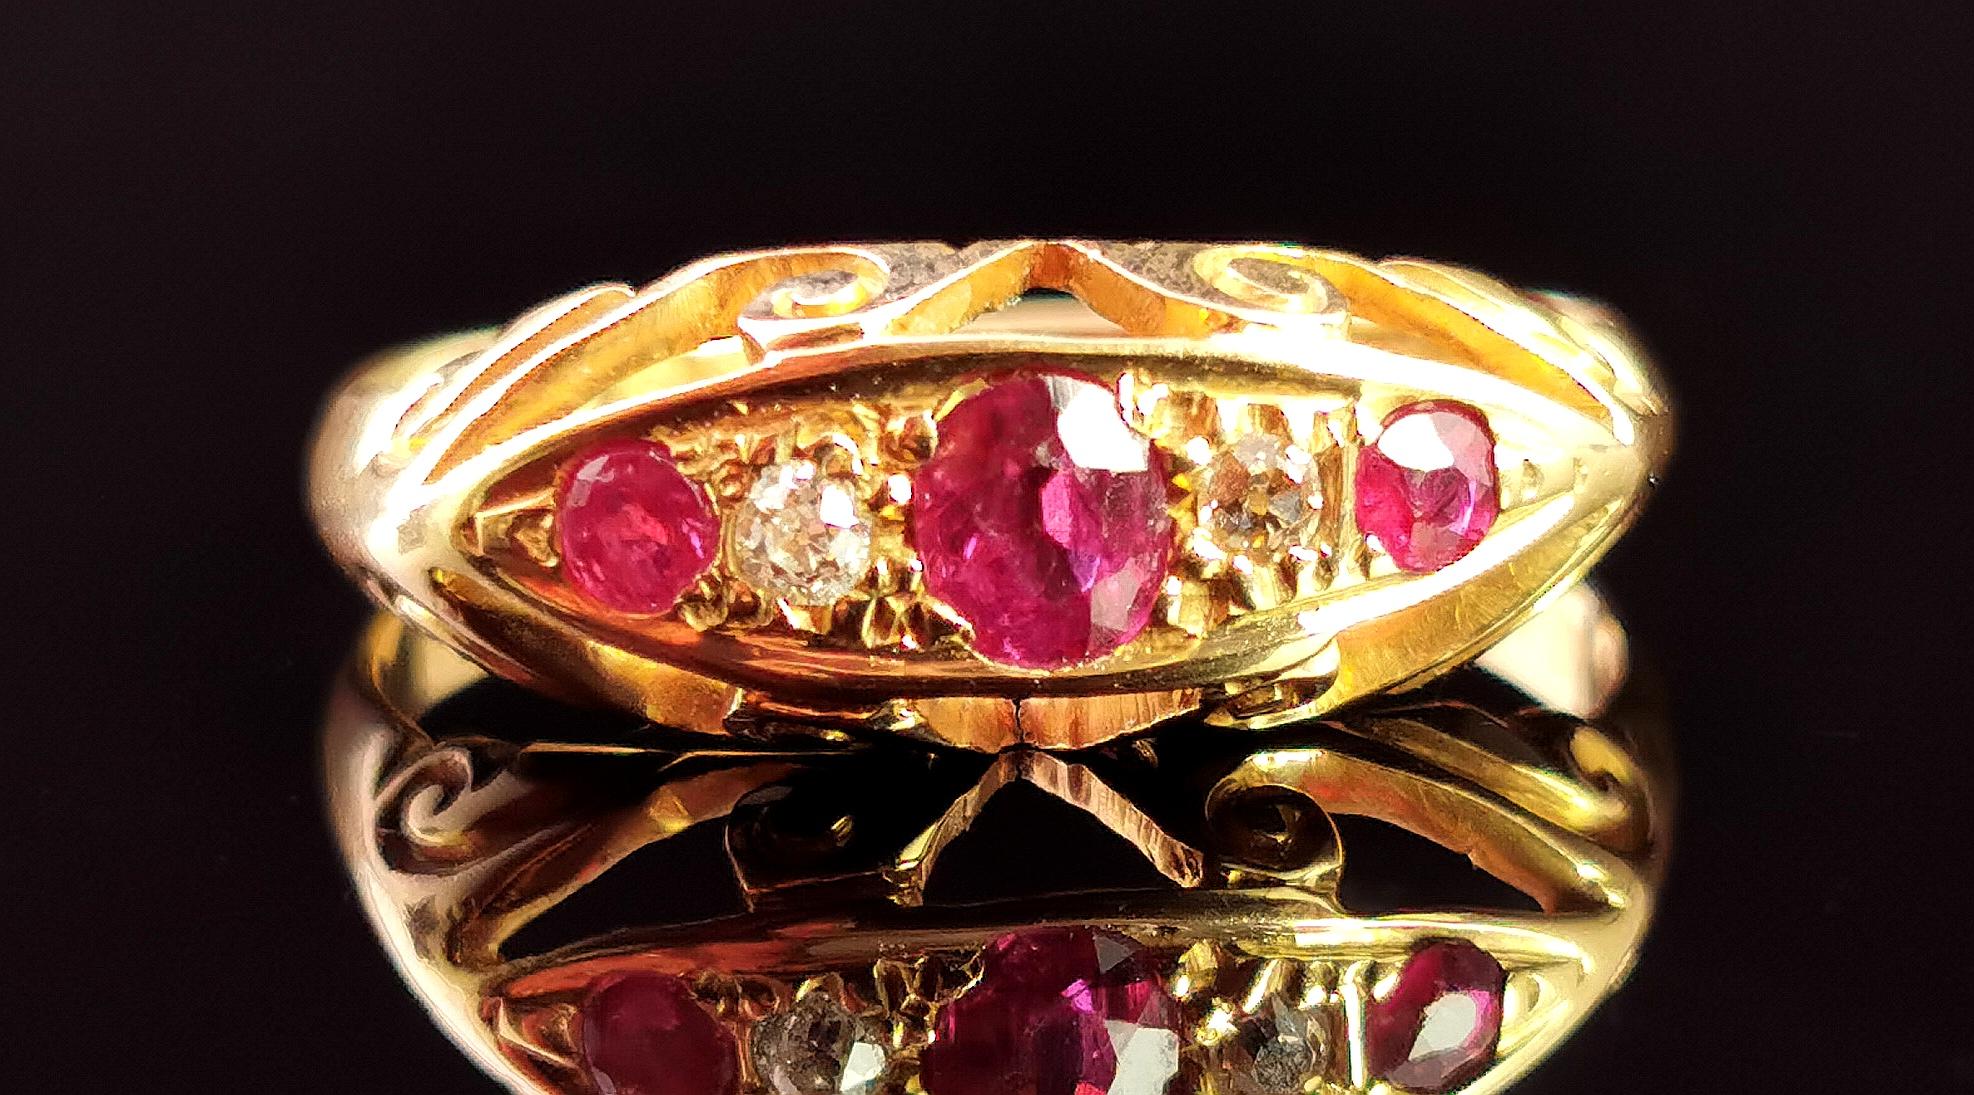 A beautiful antique, early Art Deco era Ruby and Diamond ring in 18kt yellow gold.

This beautiful ring is a boat head style ring with a gemstone set face and lovely scroll work to the shoulders, reminiscent of the Victorian era in its design.

It